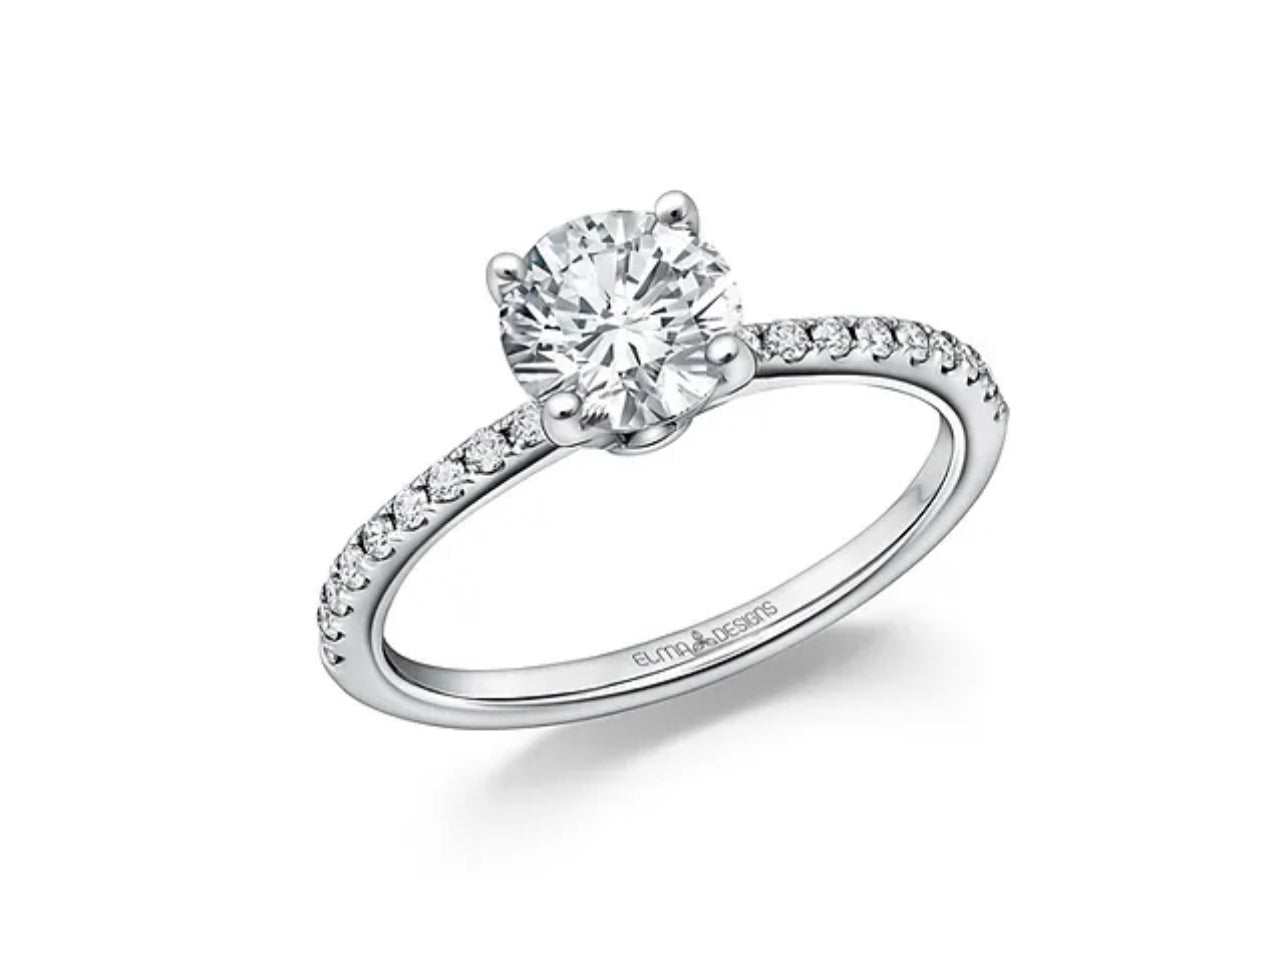 18KY Solitaire Semi-Mount Solitaire Engagement Ring w/ Thin Diamond Band